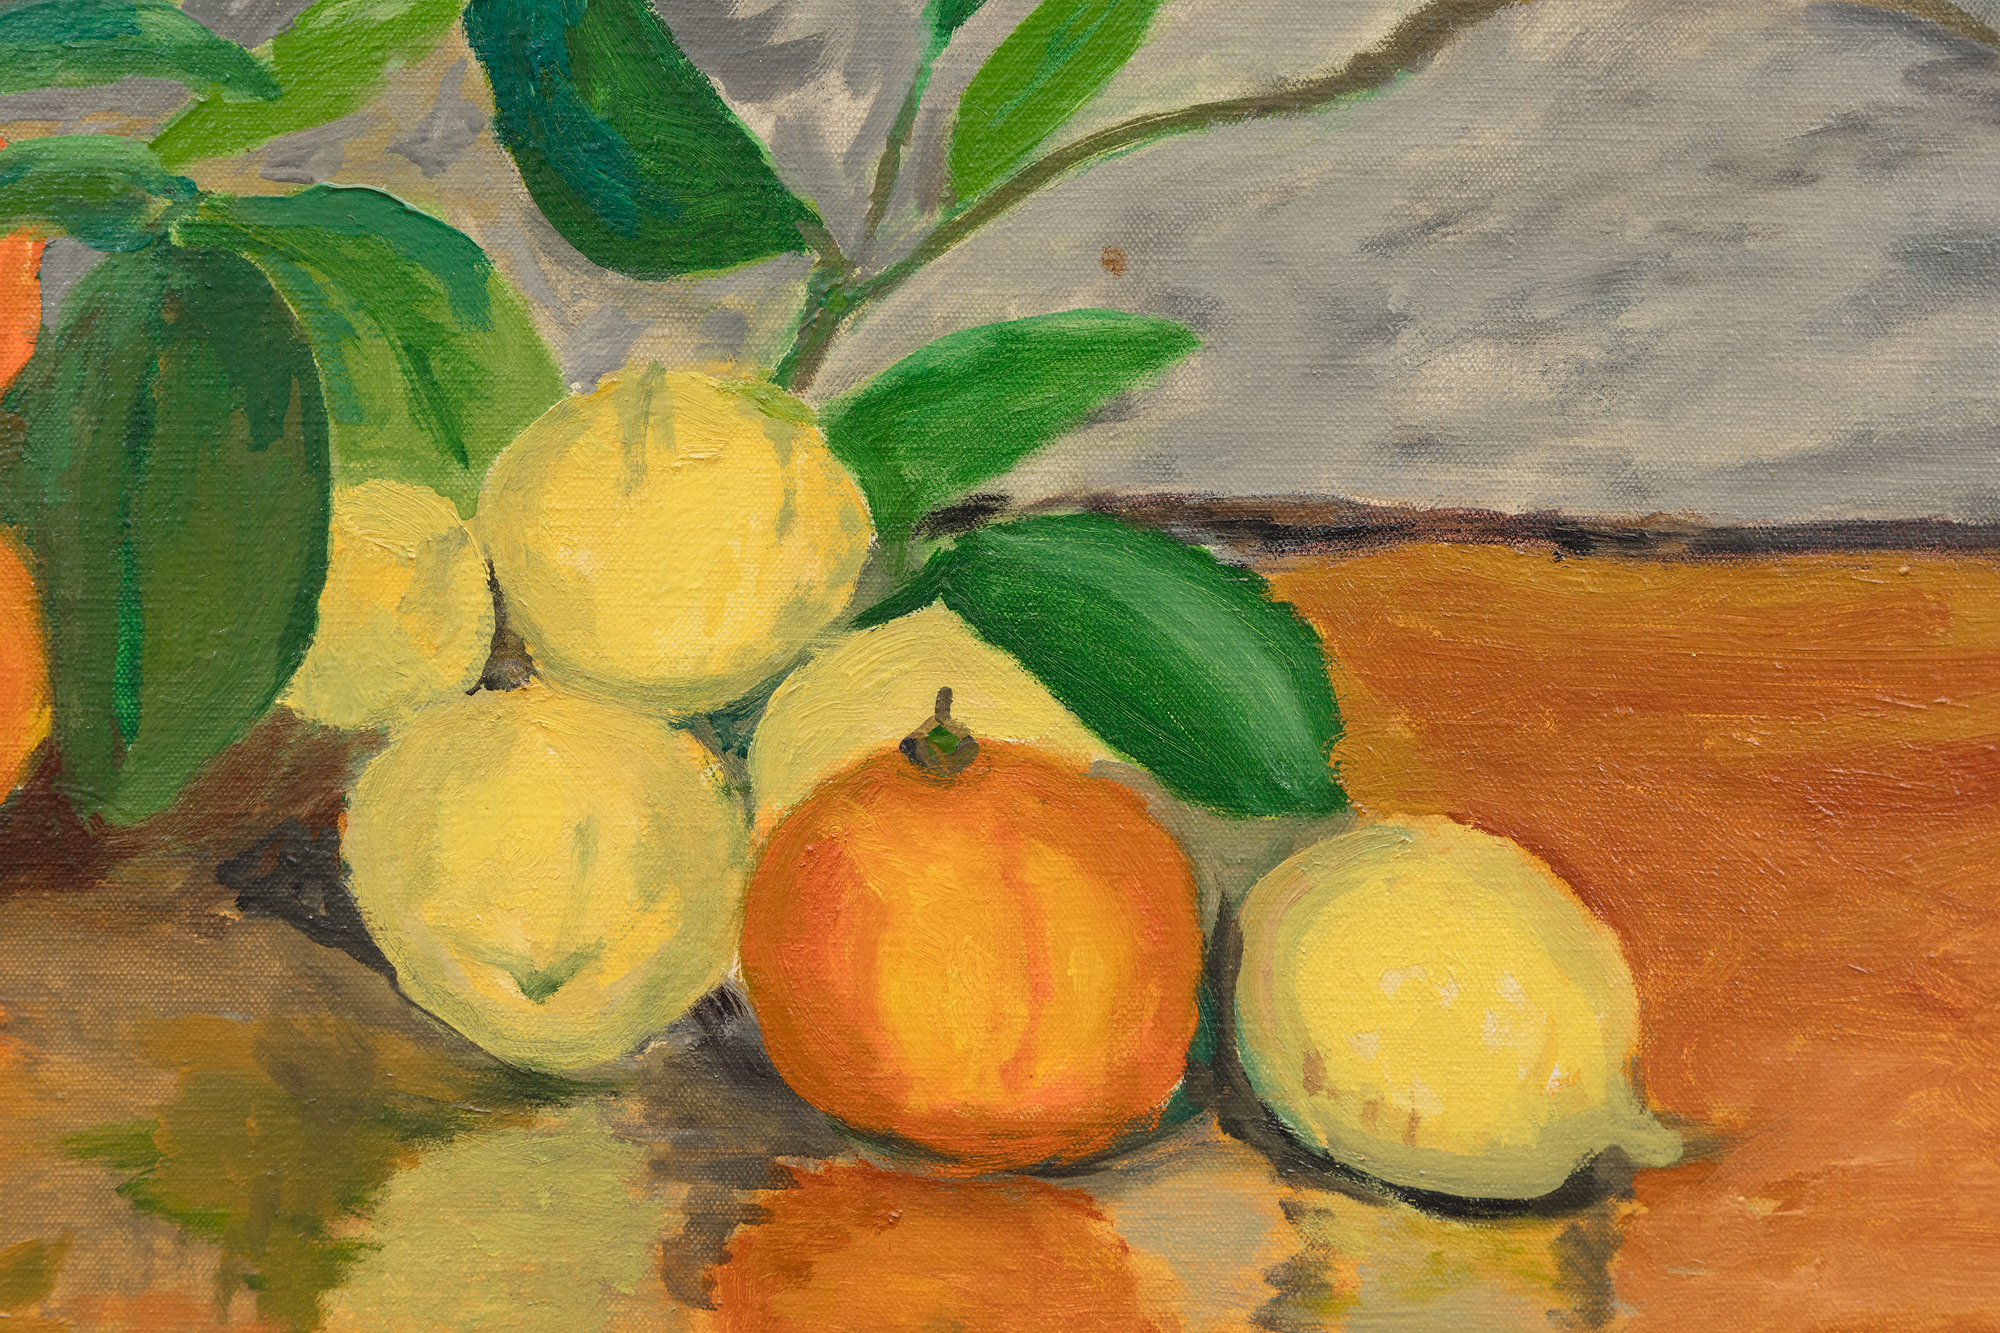 Still lifes like Oranges and Lemons (C 455) give us an insight to the rich and colorful life of Churchill, just as his landscapes and seascapes do. Churchill painted Oranges and Lemons at La Pausa. Churchill would often frequent La Pausa as the guest of his literary agent, Emery Reves and his wife, Wendy.  Reves purchased the home from Coco Chanel.  While other members of the Churchill family did not share his enthusiasm, Churchill and his daughter Sarah loved the place, which Churchill affectionately called “LaPausaland”.
<br>
<br>To avoid painting outside on a chilly January morning, Wendy Reves arranged the fruit for Churchill to paint. Surrounded by the Reves’s superb collection of Impressionist and Post-Impressionist works, including a number of paintings by Paul Cézanne, Oranges and Lemons illuminates Churchill’s relationships and the influence of Cézanne, who he admired. The painting, like Churchill, has lived a colorful life, exhibited at both the 1959 Royal Academy of Art exhibition of his paintings and the 1965 New York World’s Fair.